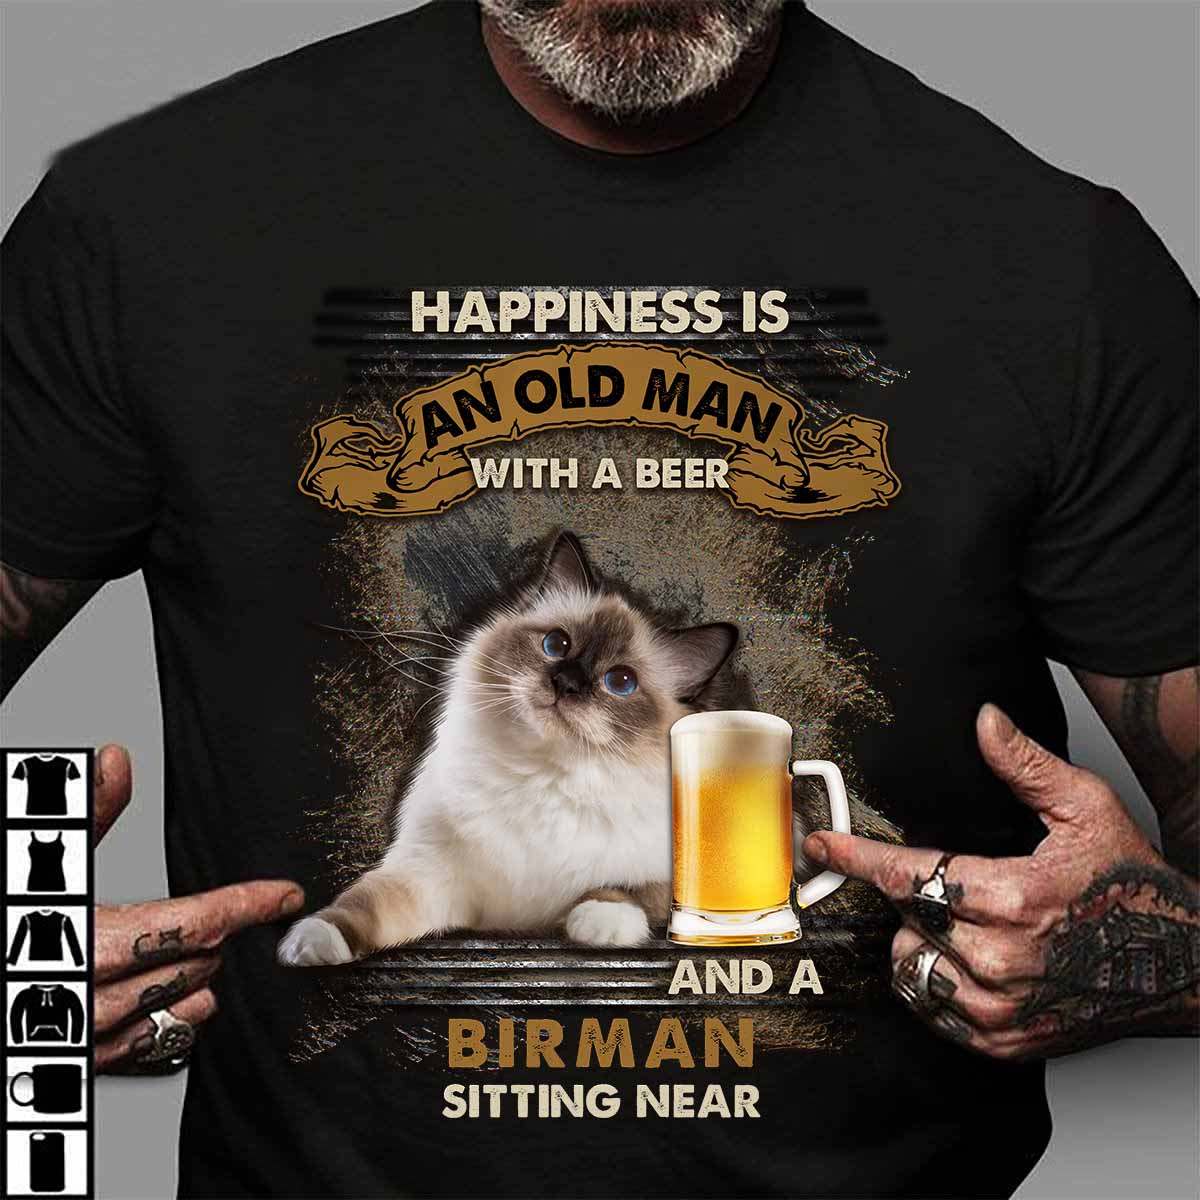 Happiness is an old man with a beer and a Birman sitting near - Birman cat